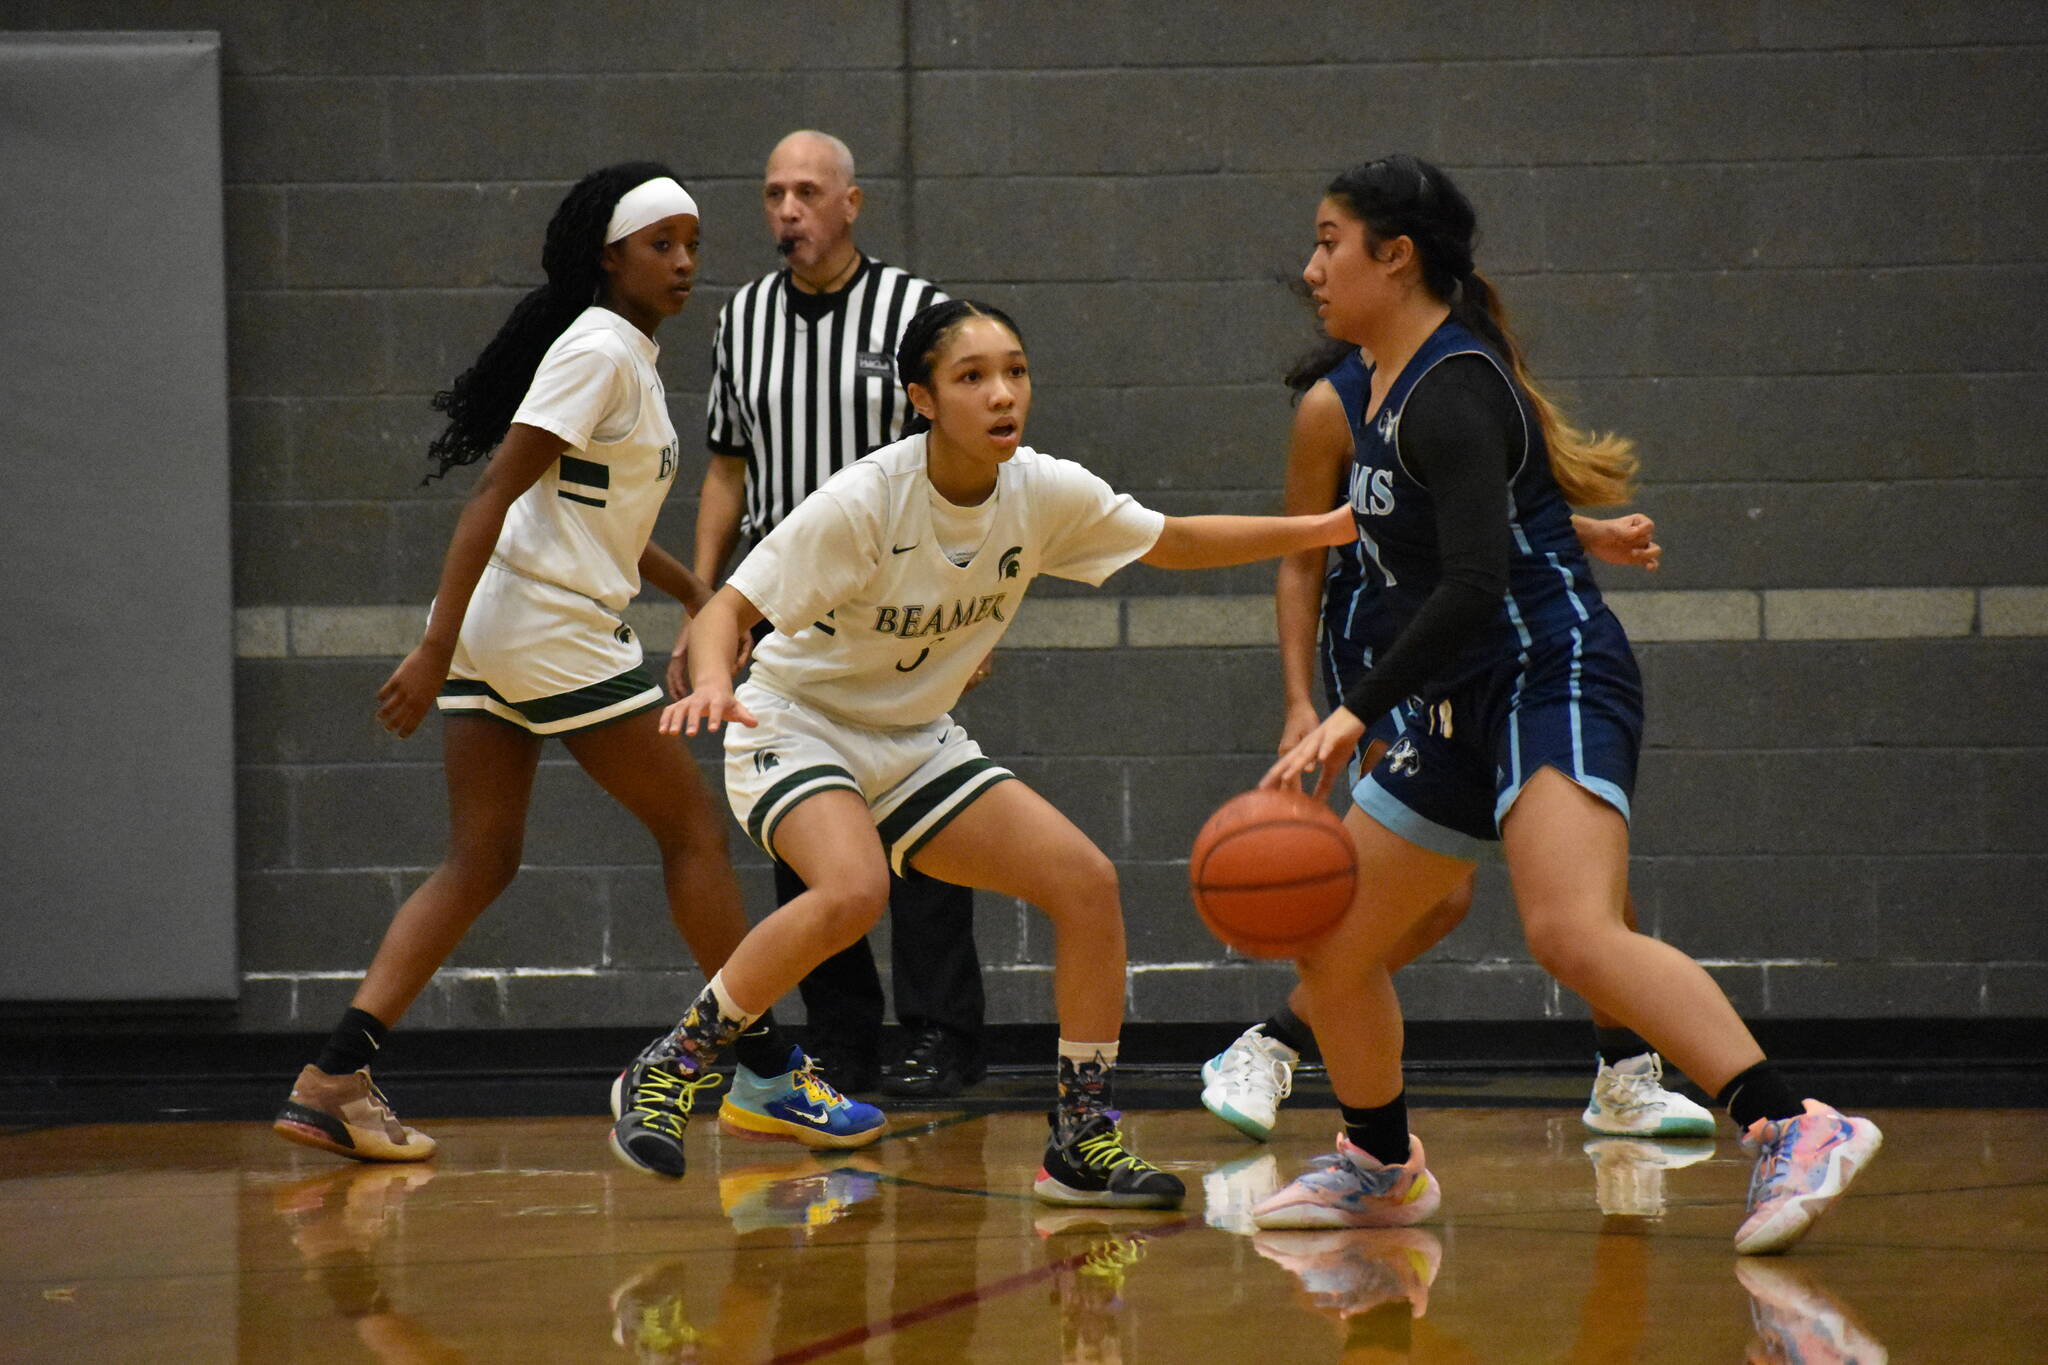 Todd Beamer guard Aaliyah Chappell locks down the Mount Rainier ball handler in the first quarter.